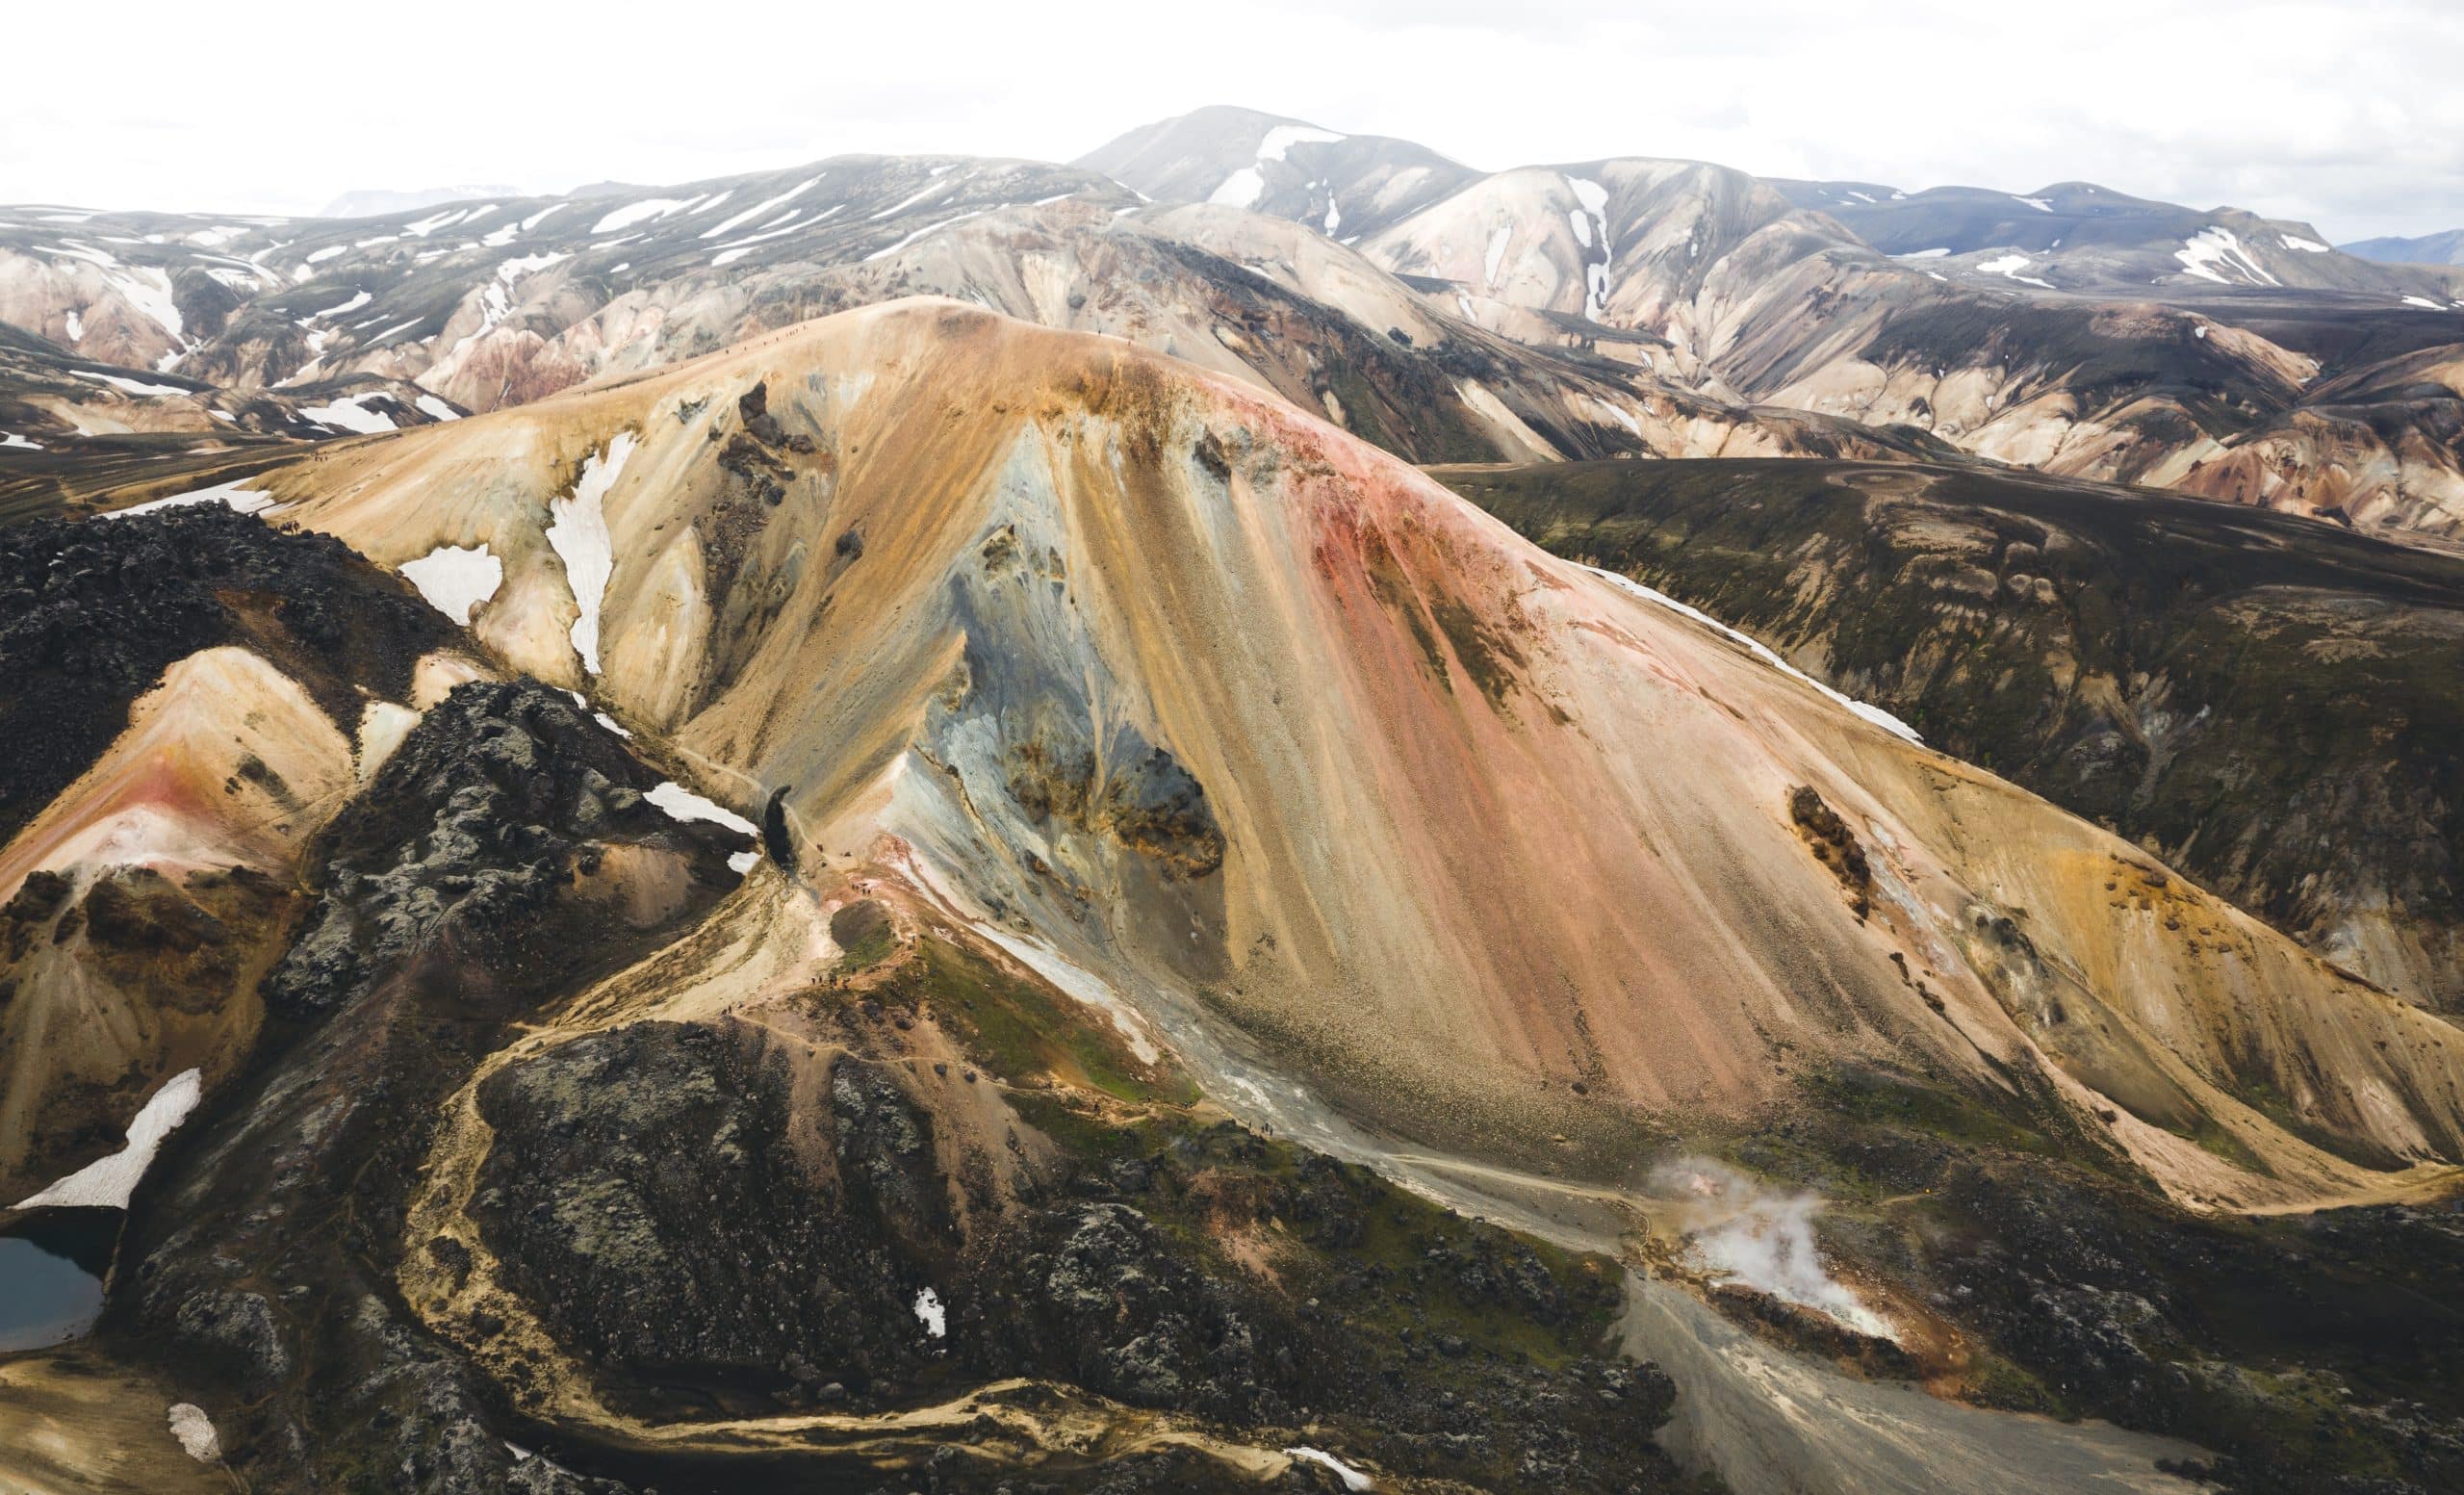 Colourful mountains in the Landmannalaugar Region in Iceland.